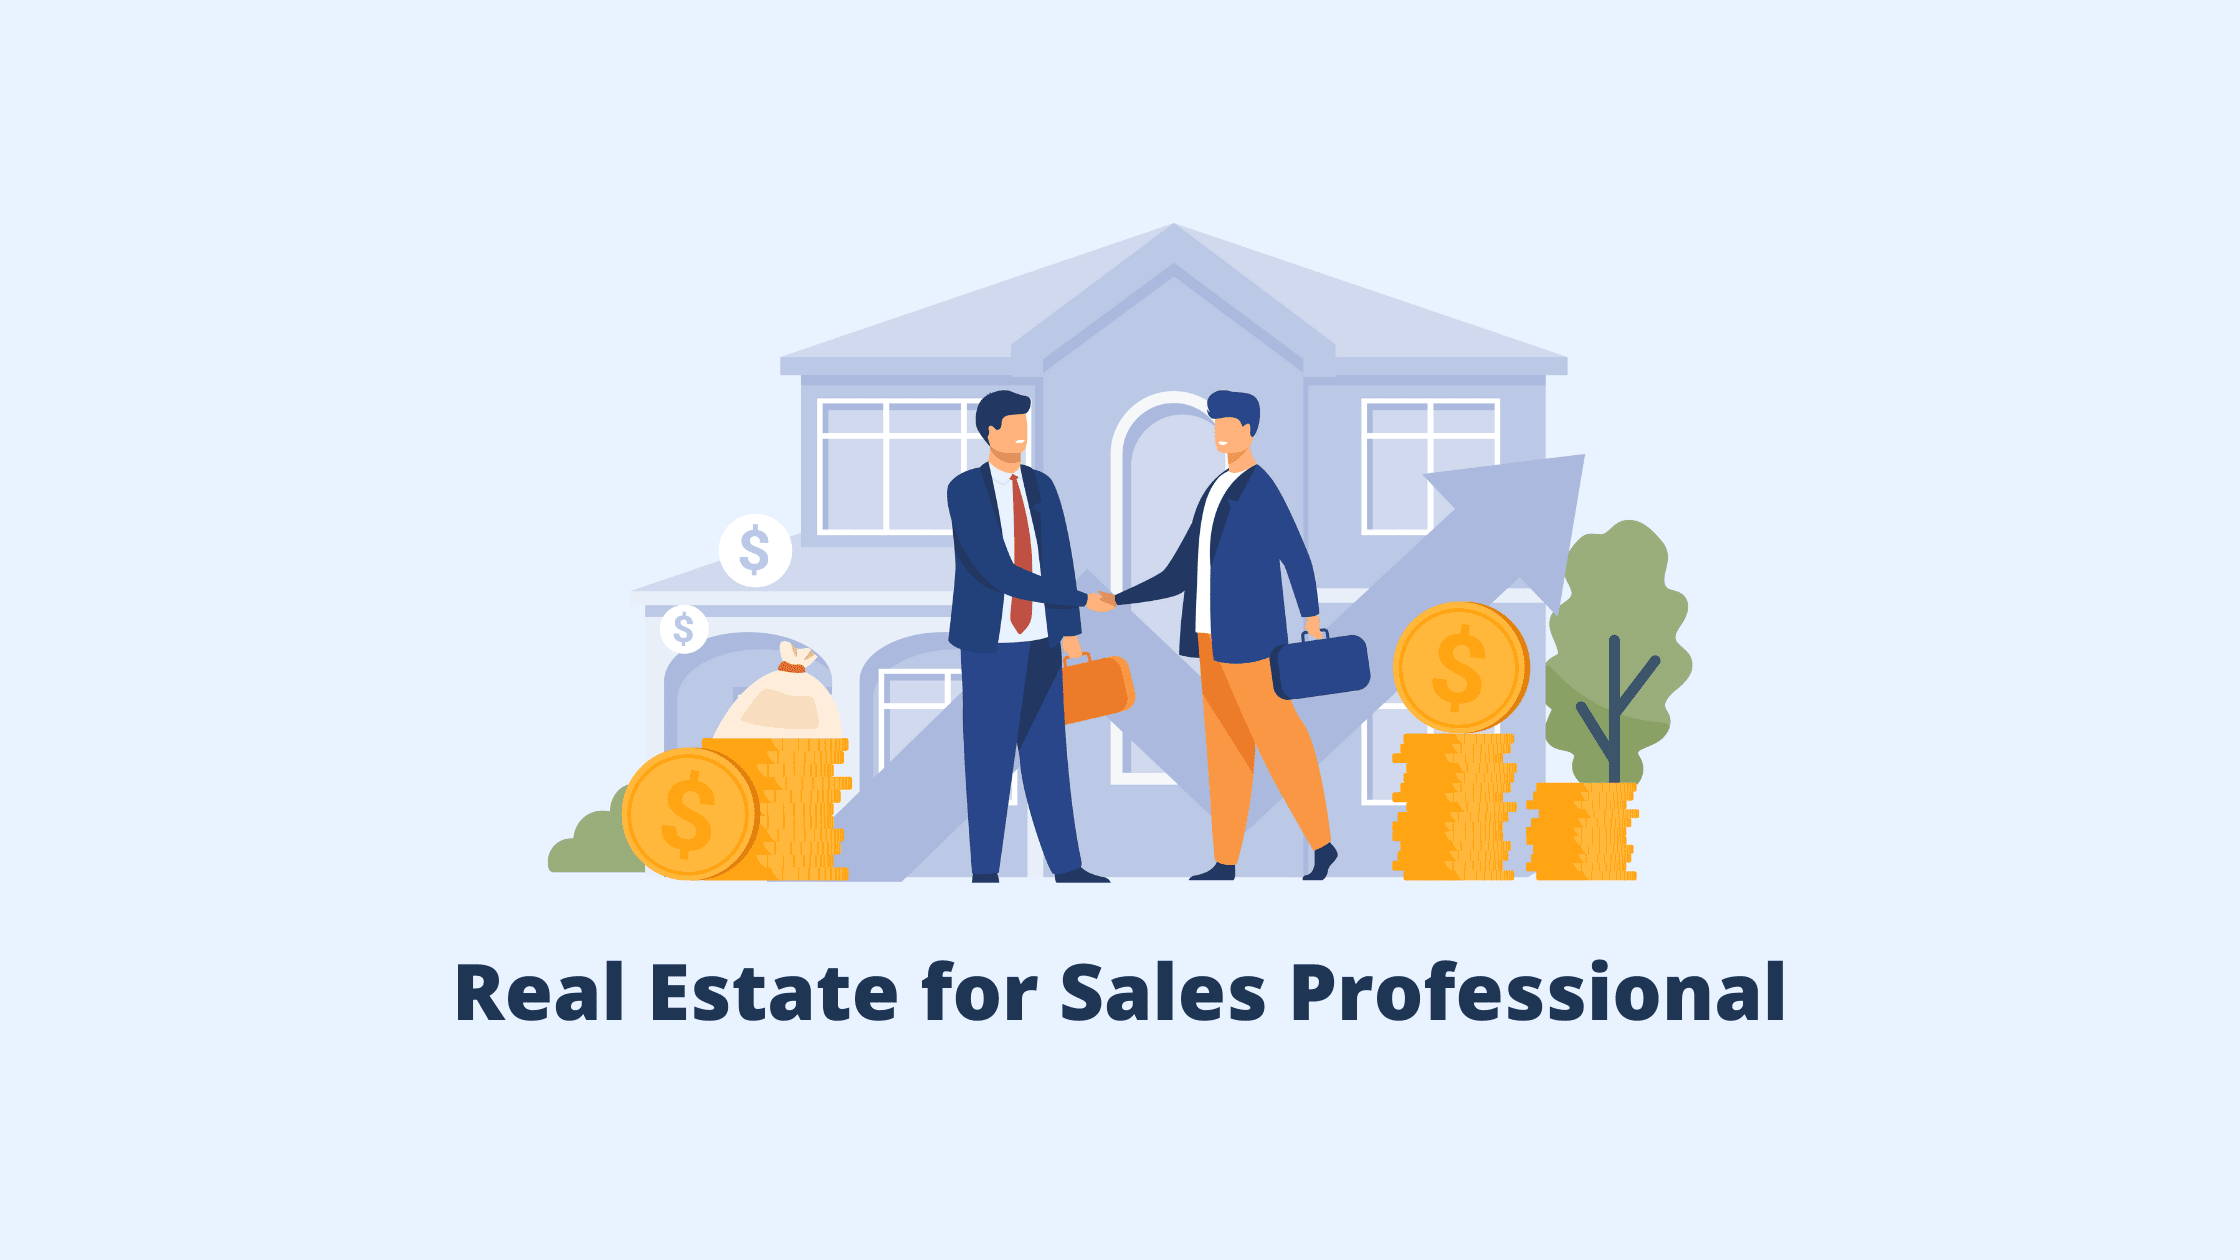 What is Real Estate for Sales Professional in 2021